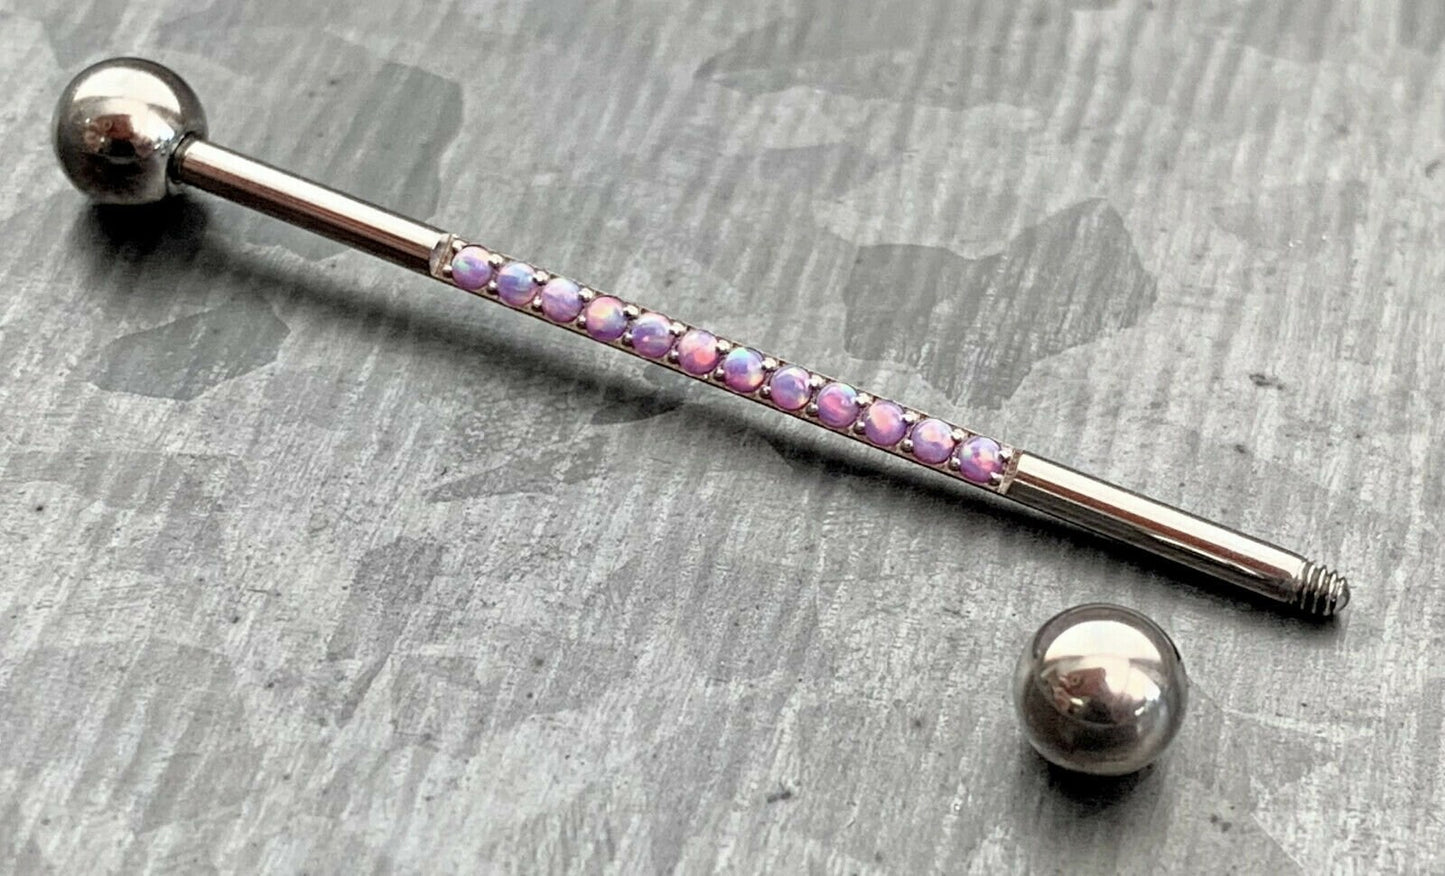 1 Piece of Implant Grade Titanium CNC Set Lined Opals Industrial Barbell - 14g, Length 38mm 1.5" - Silver, Black, Gold, and Rose Gold!!